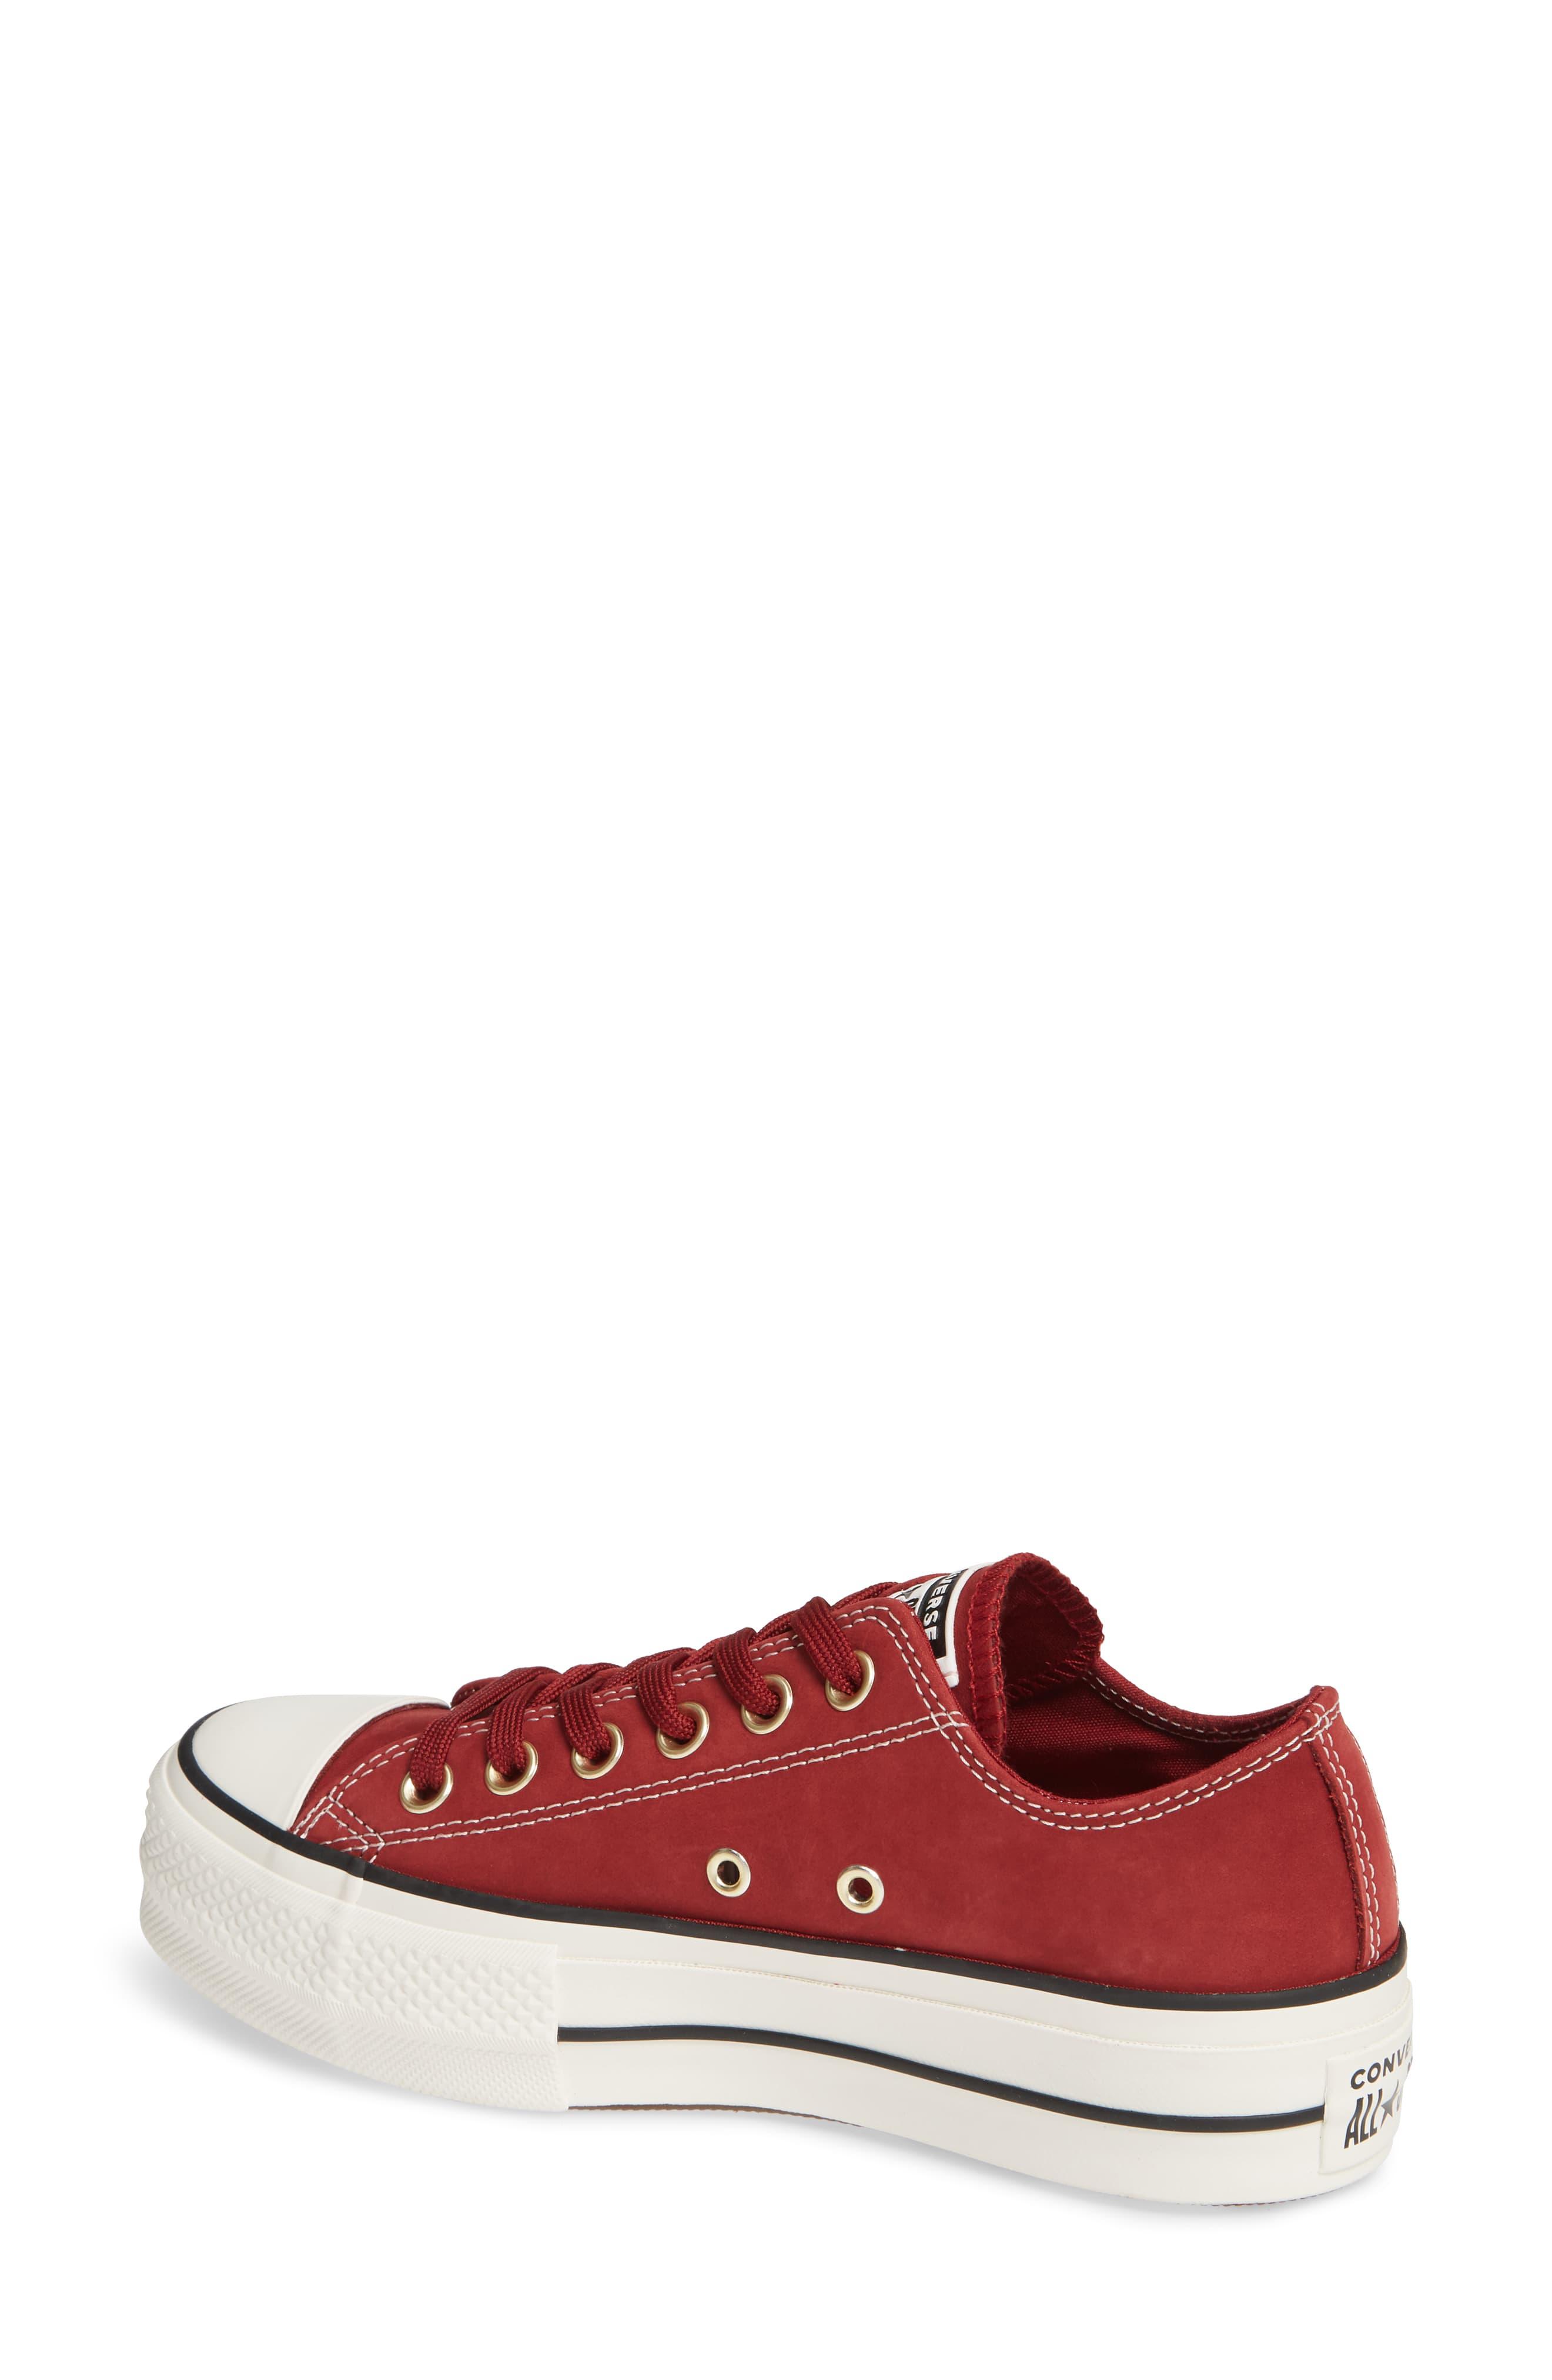 Converse Chuck Taylor All Star Nubuck Lift Low Top Luxembourg, SAVE 34% -  mpgc.net